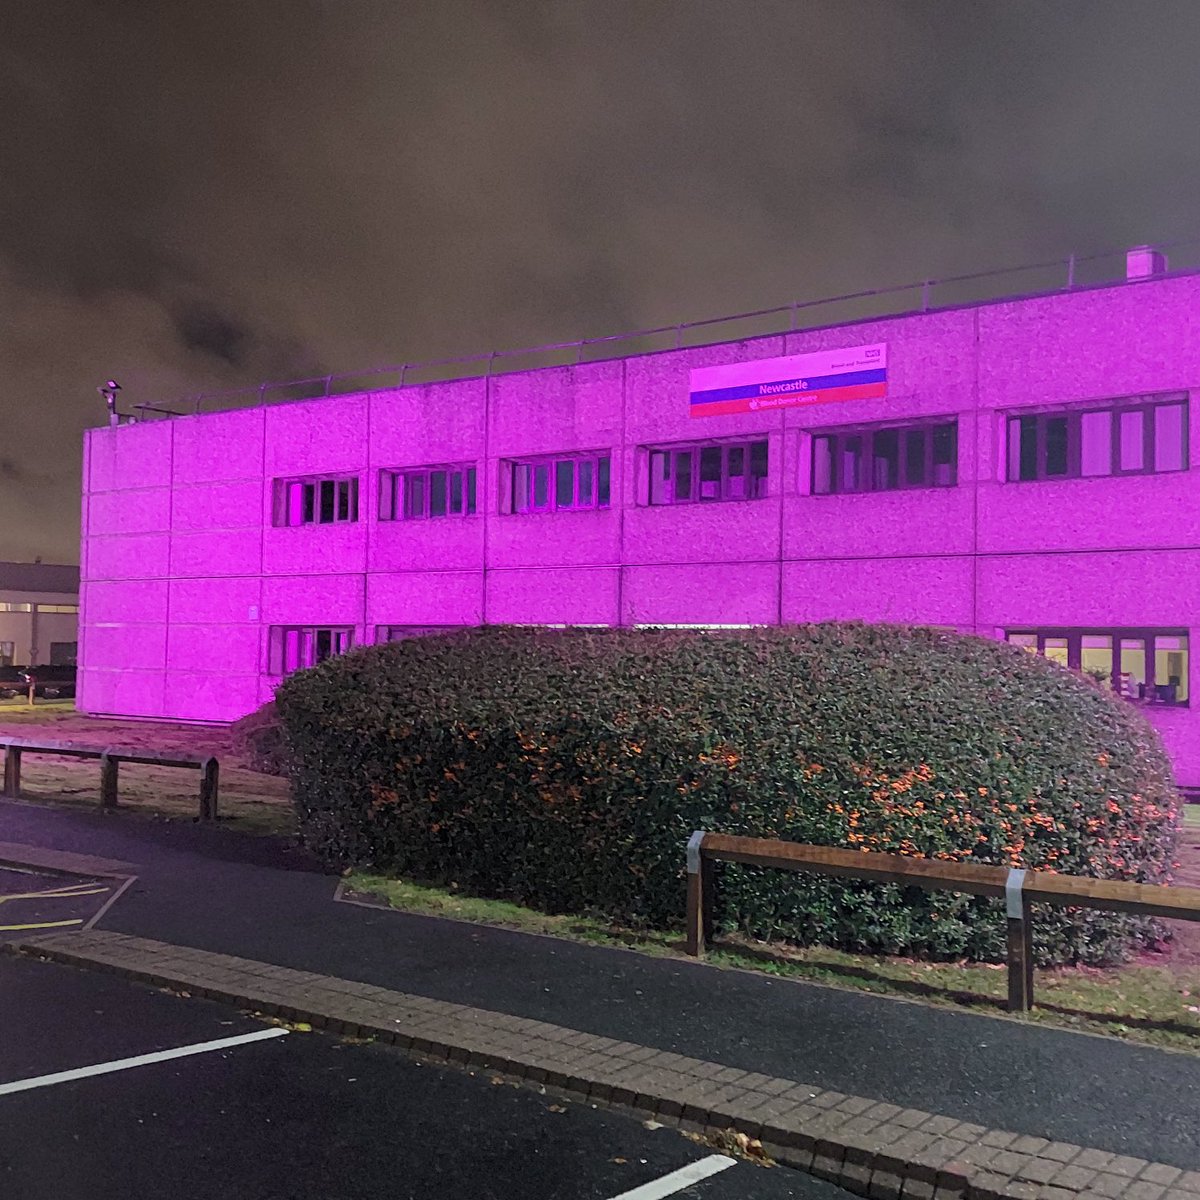 NHSBT Newcastle light centre up Pink. Thanks to Facilities for arranging this and all the support you give to the Specialist Nurse Organ Donation Team ⁦@lynnrobson17⁩ ⁦@nhsbtnursing⁩ ,⁦@NHSOrganDonor⁩ ⁦@doc_in_toon⁩